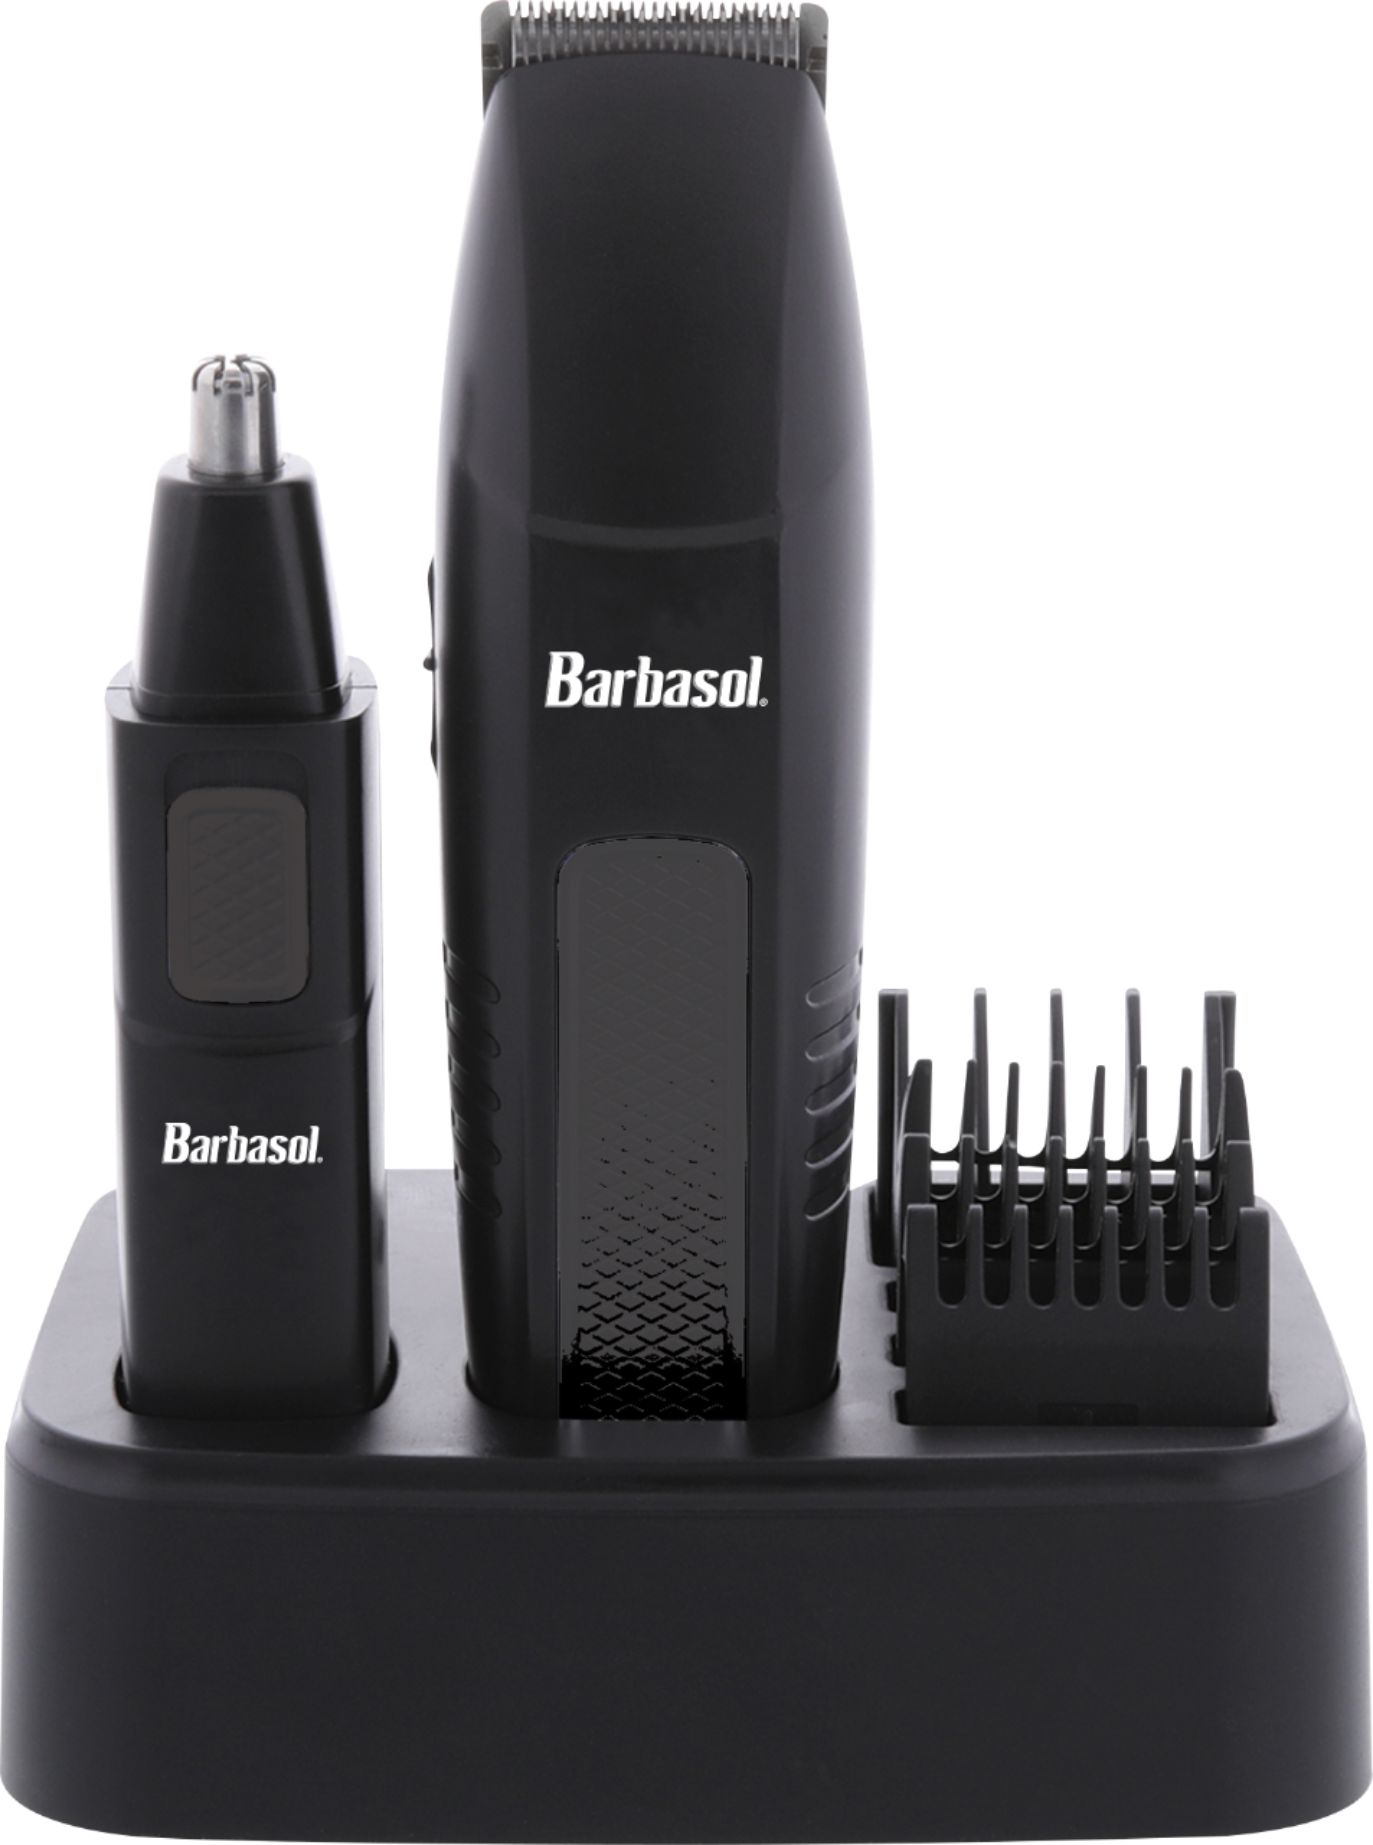 barbasol ear and nose trimmer reviews